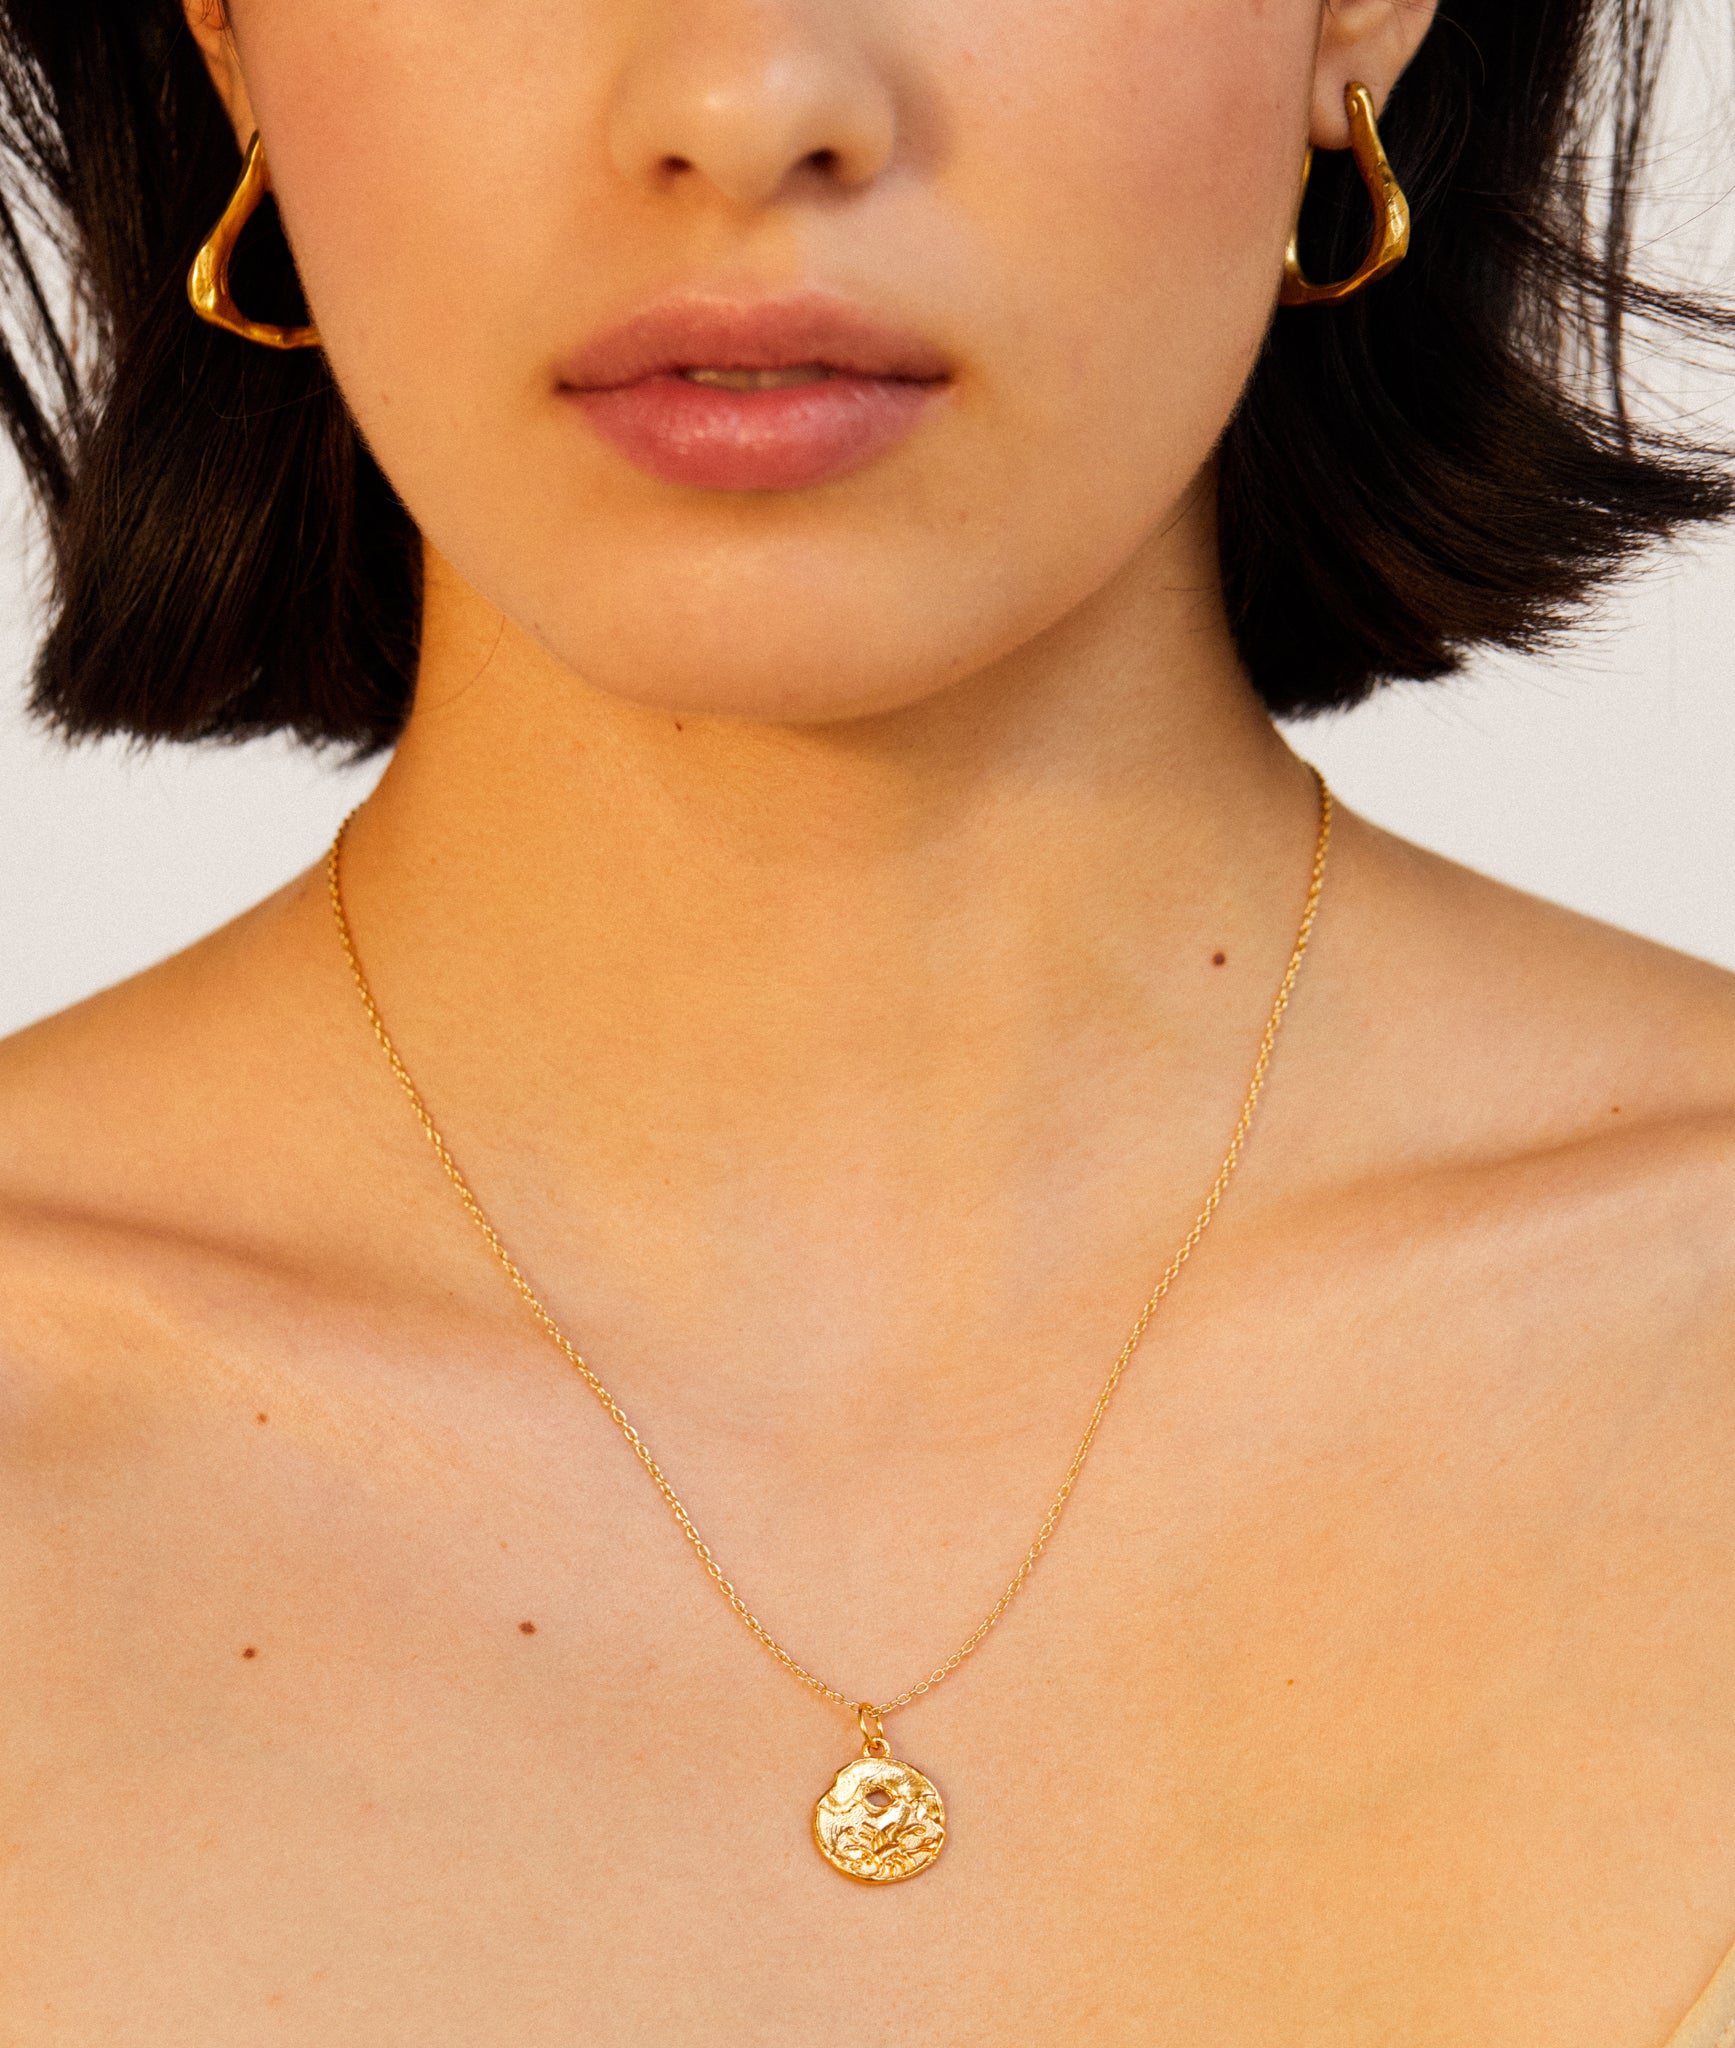 detail of model wearing Alighieri Gold Plated Scorpio Zodiac Necklace Medallion